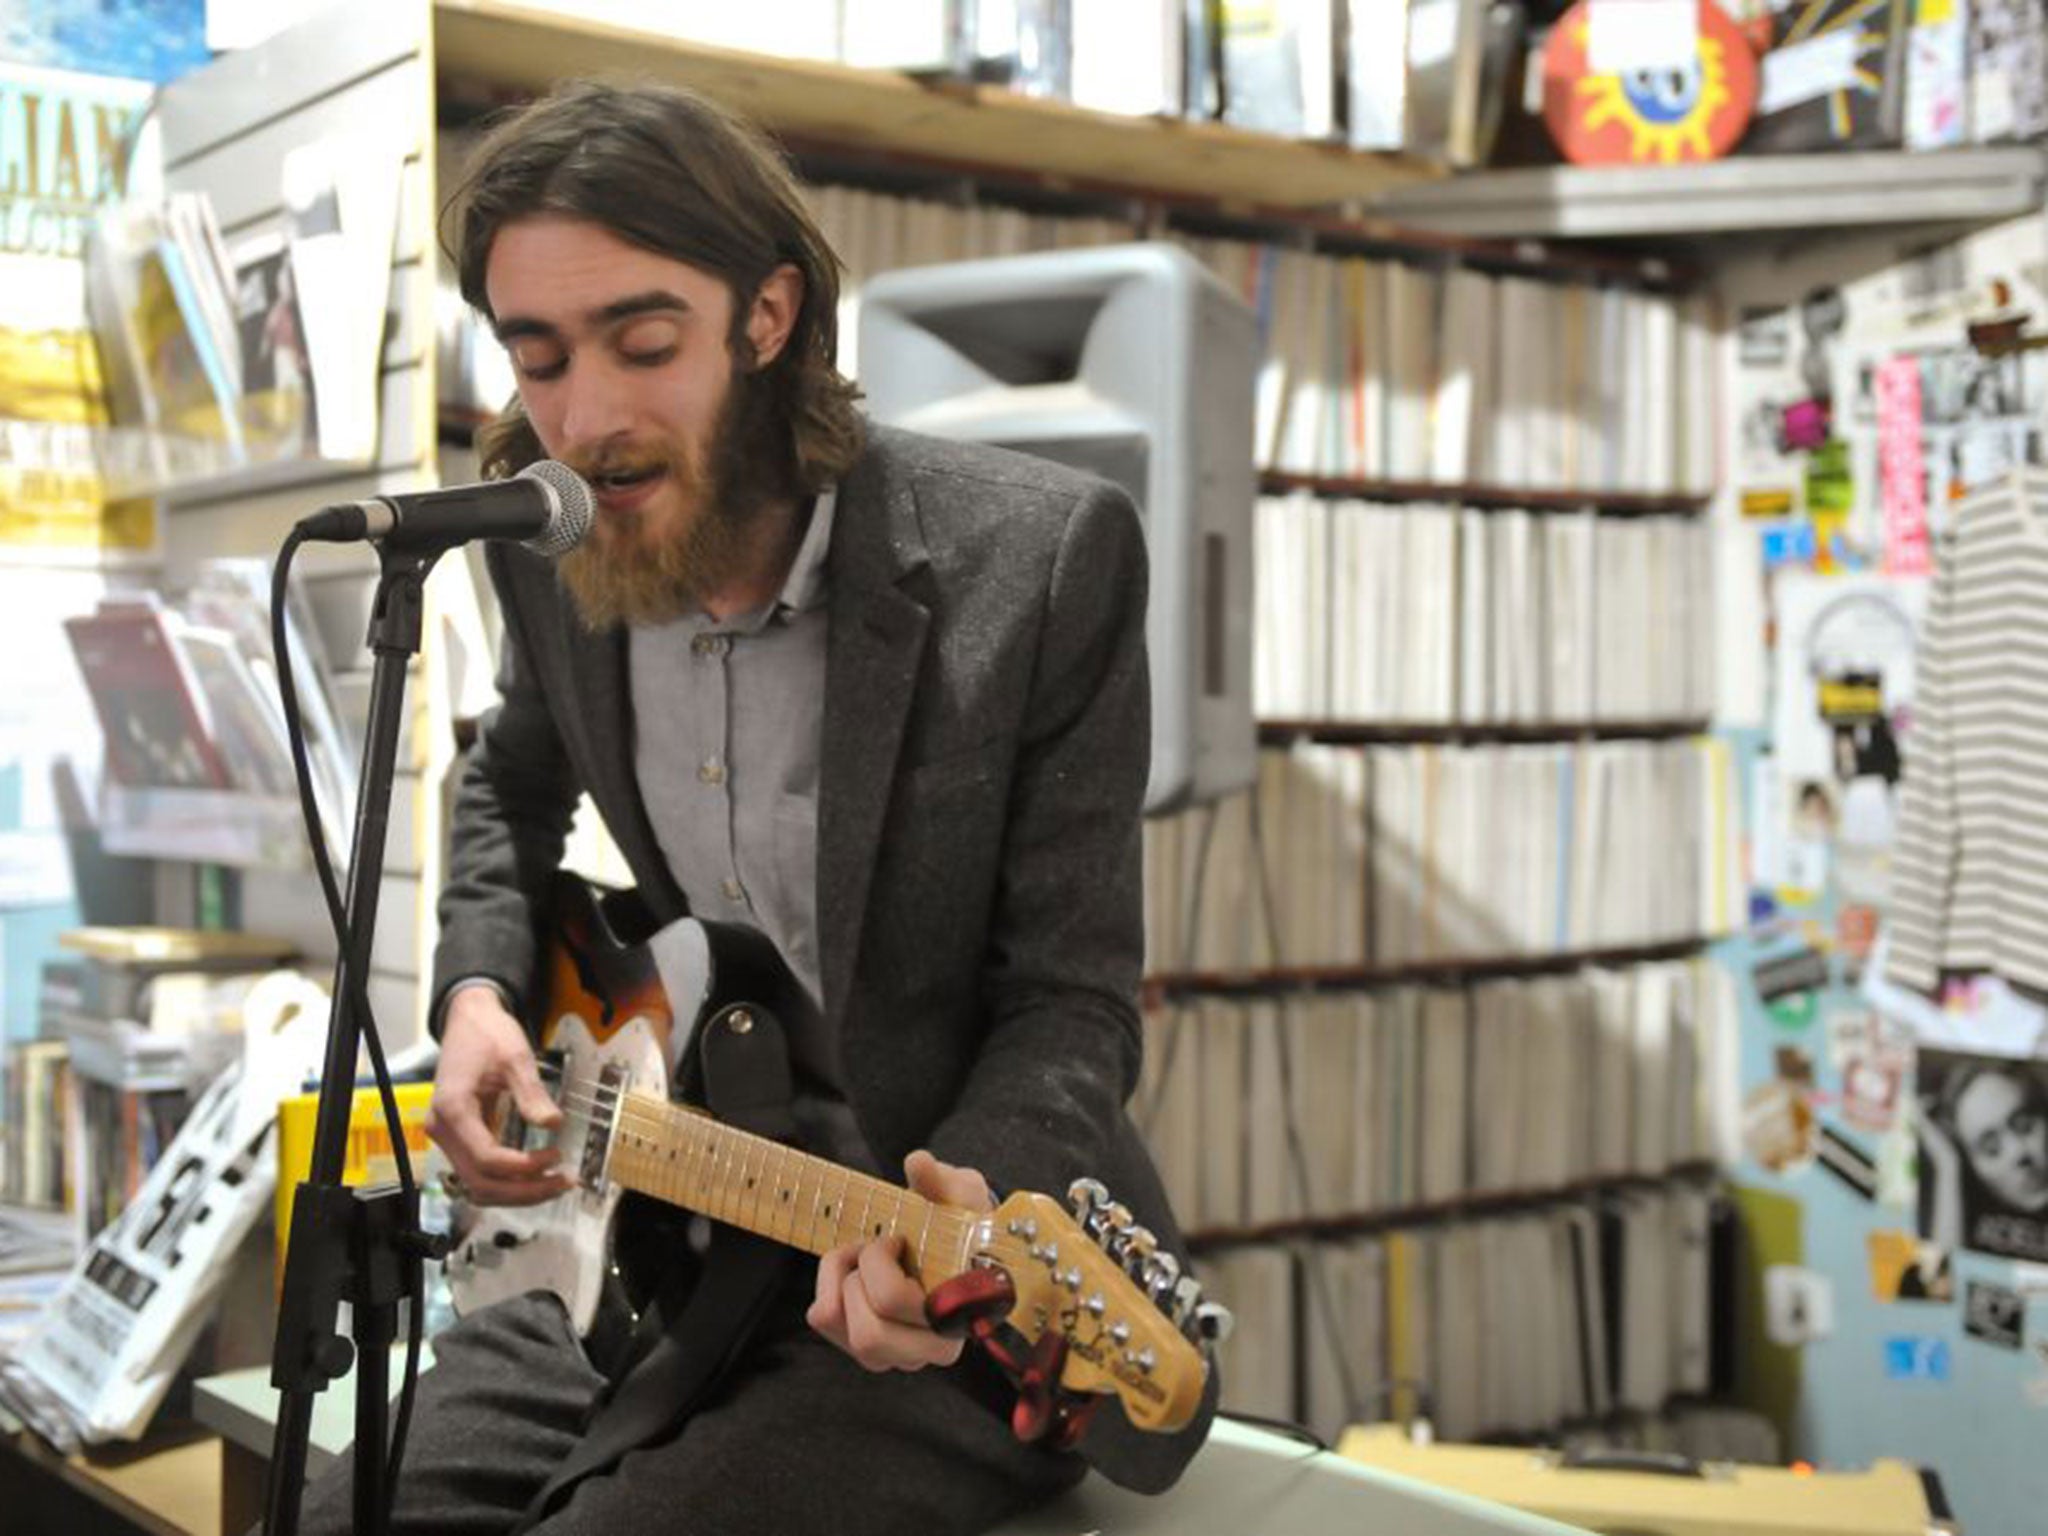 Keaton Henson has struggled to cope with crippling stage fright